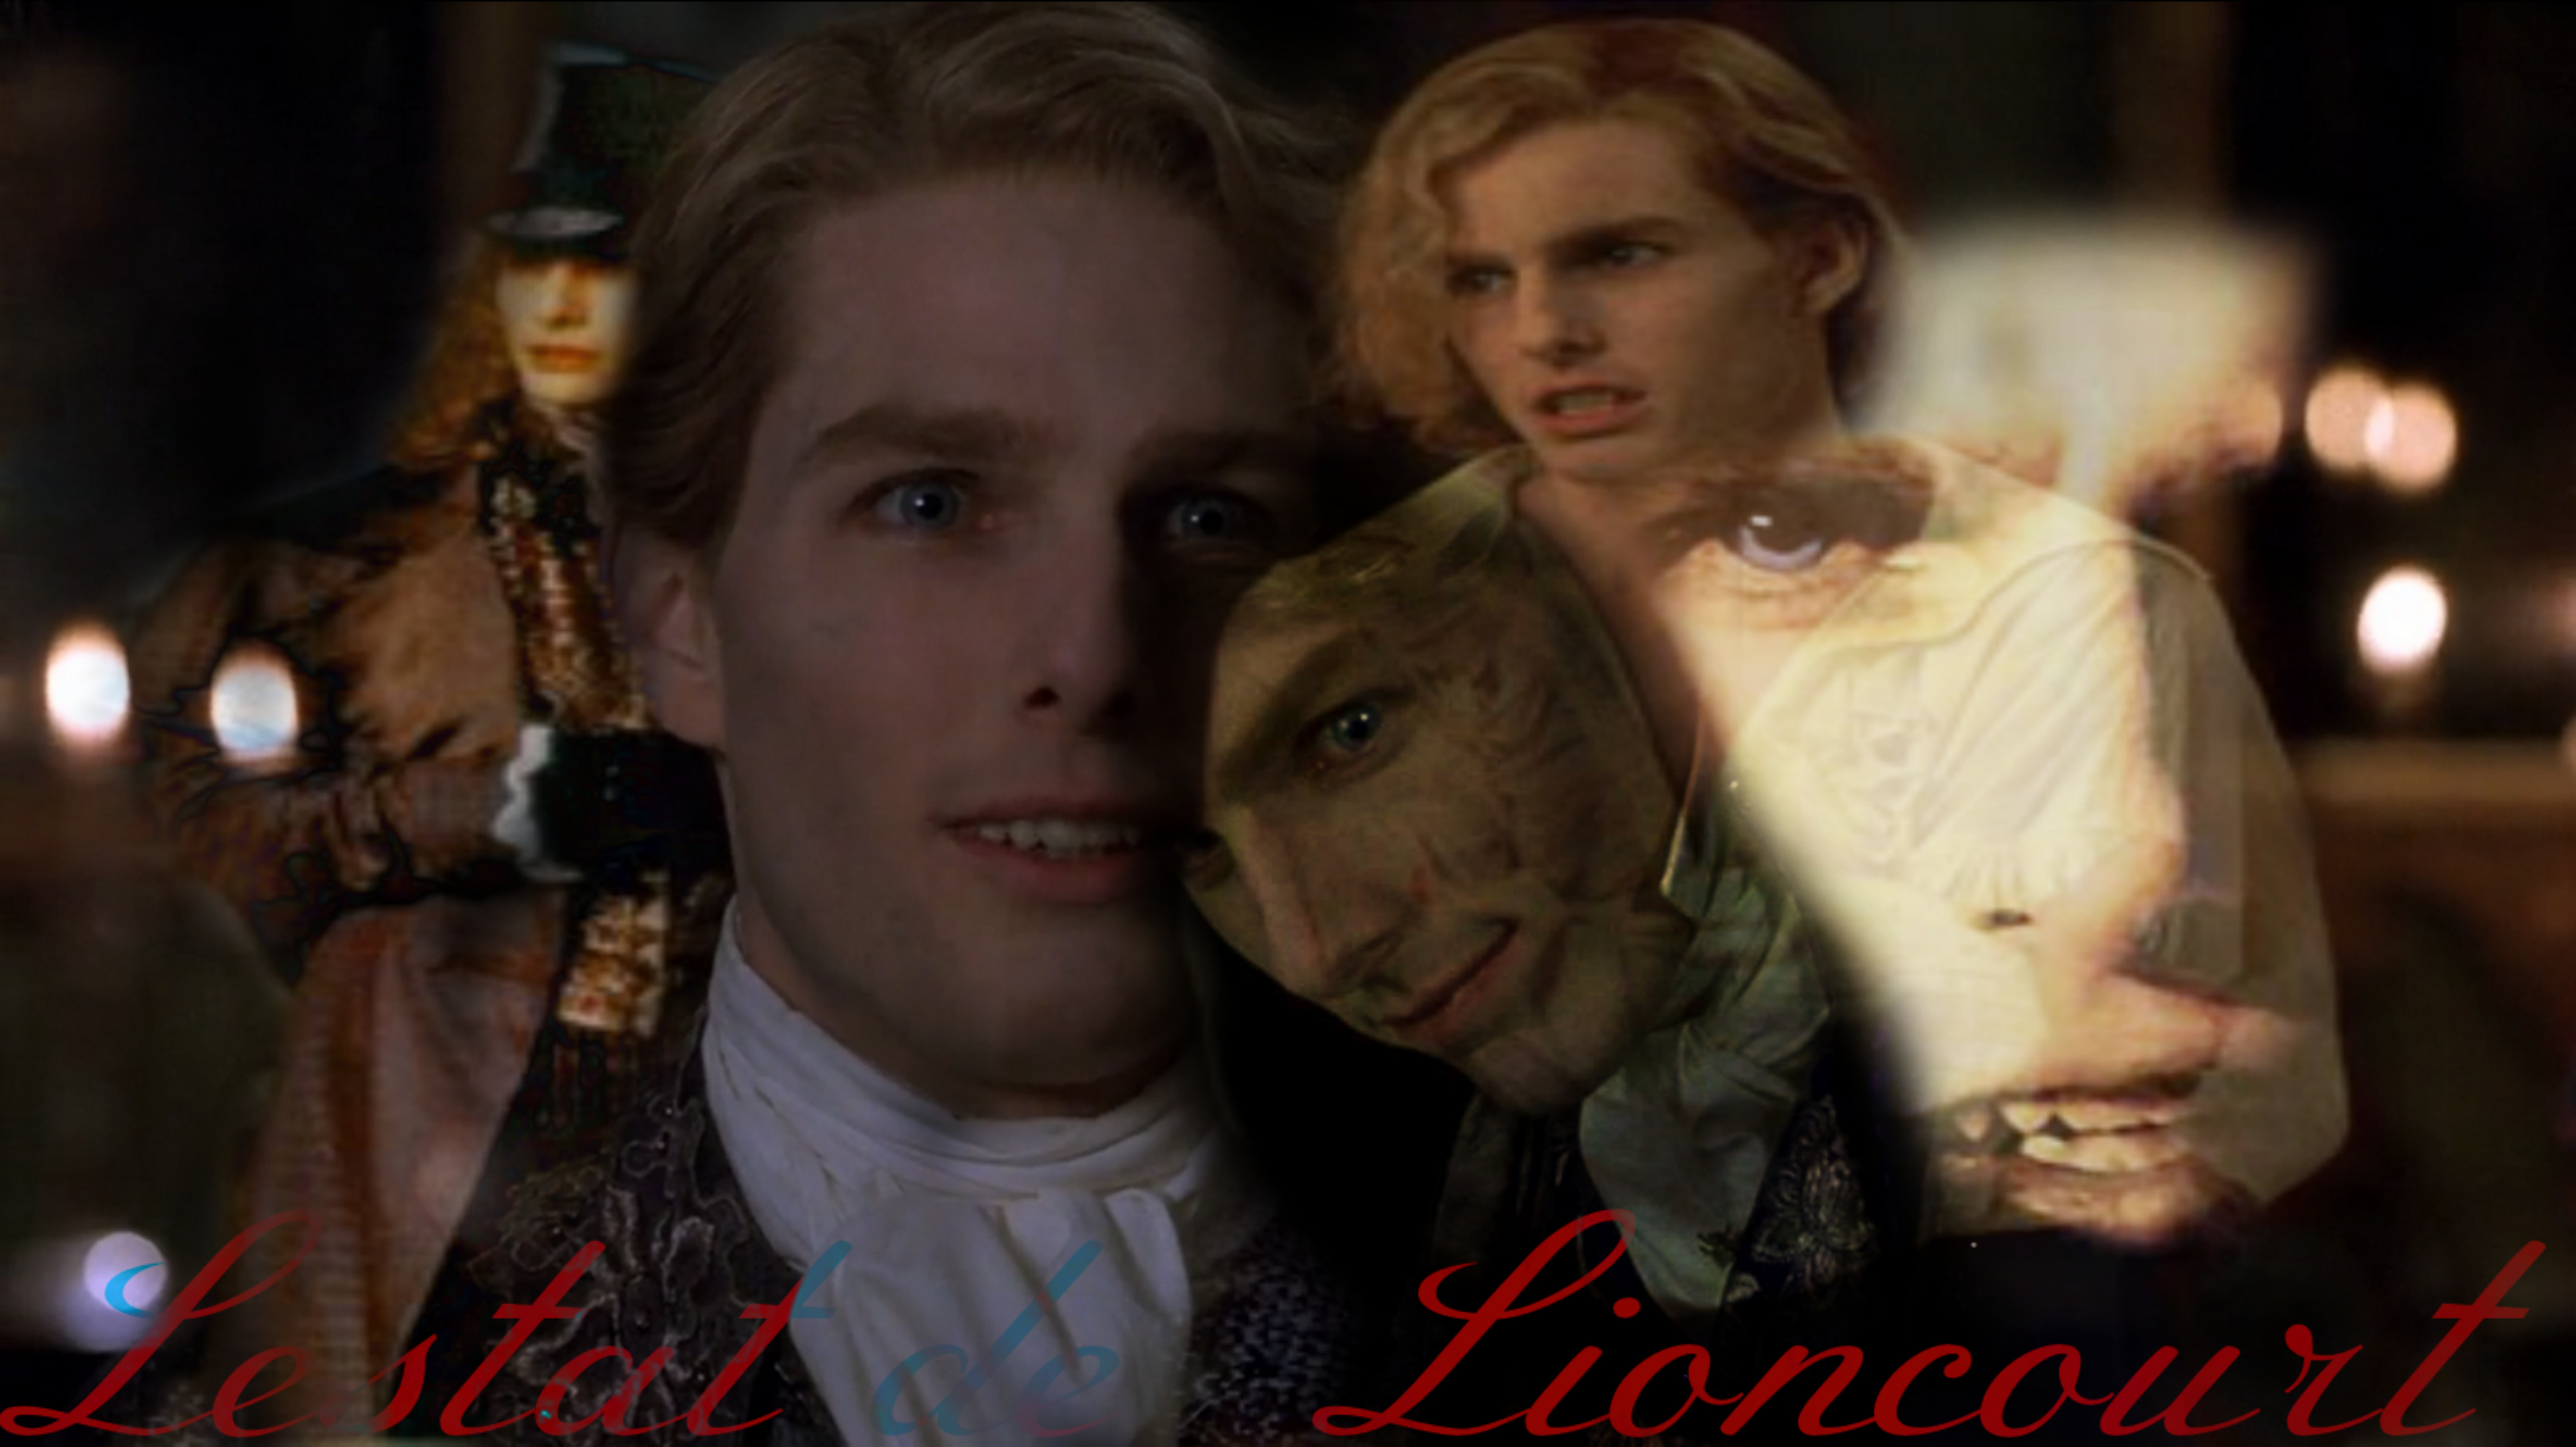 Cruise S Lestat Wallpaper By Scarecrowwoman